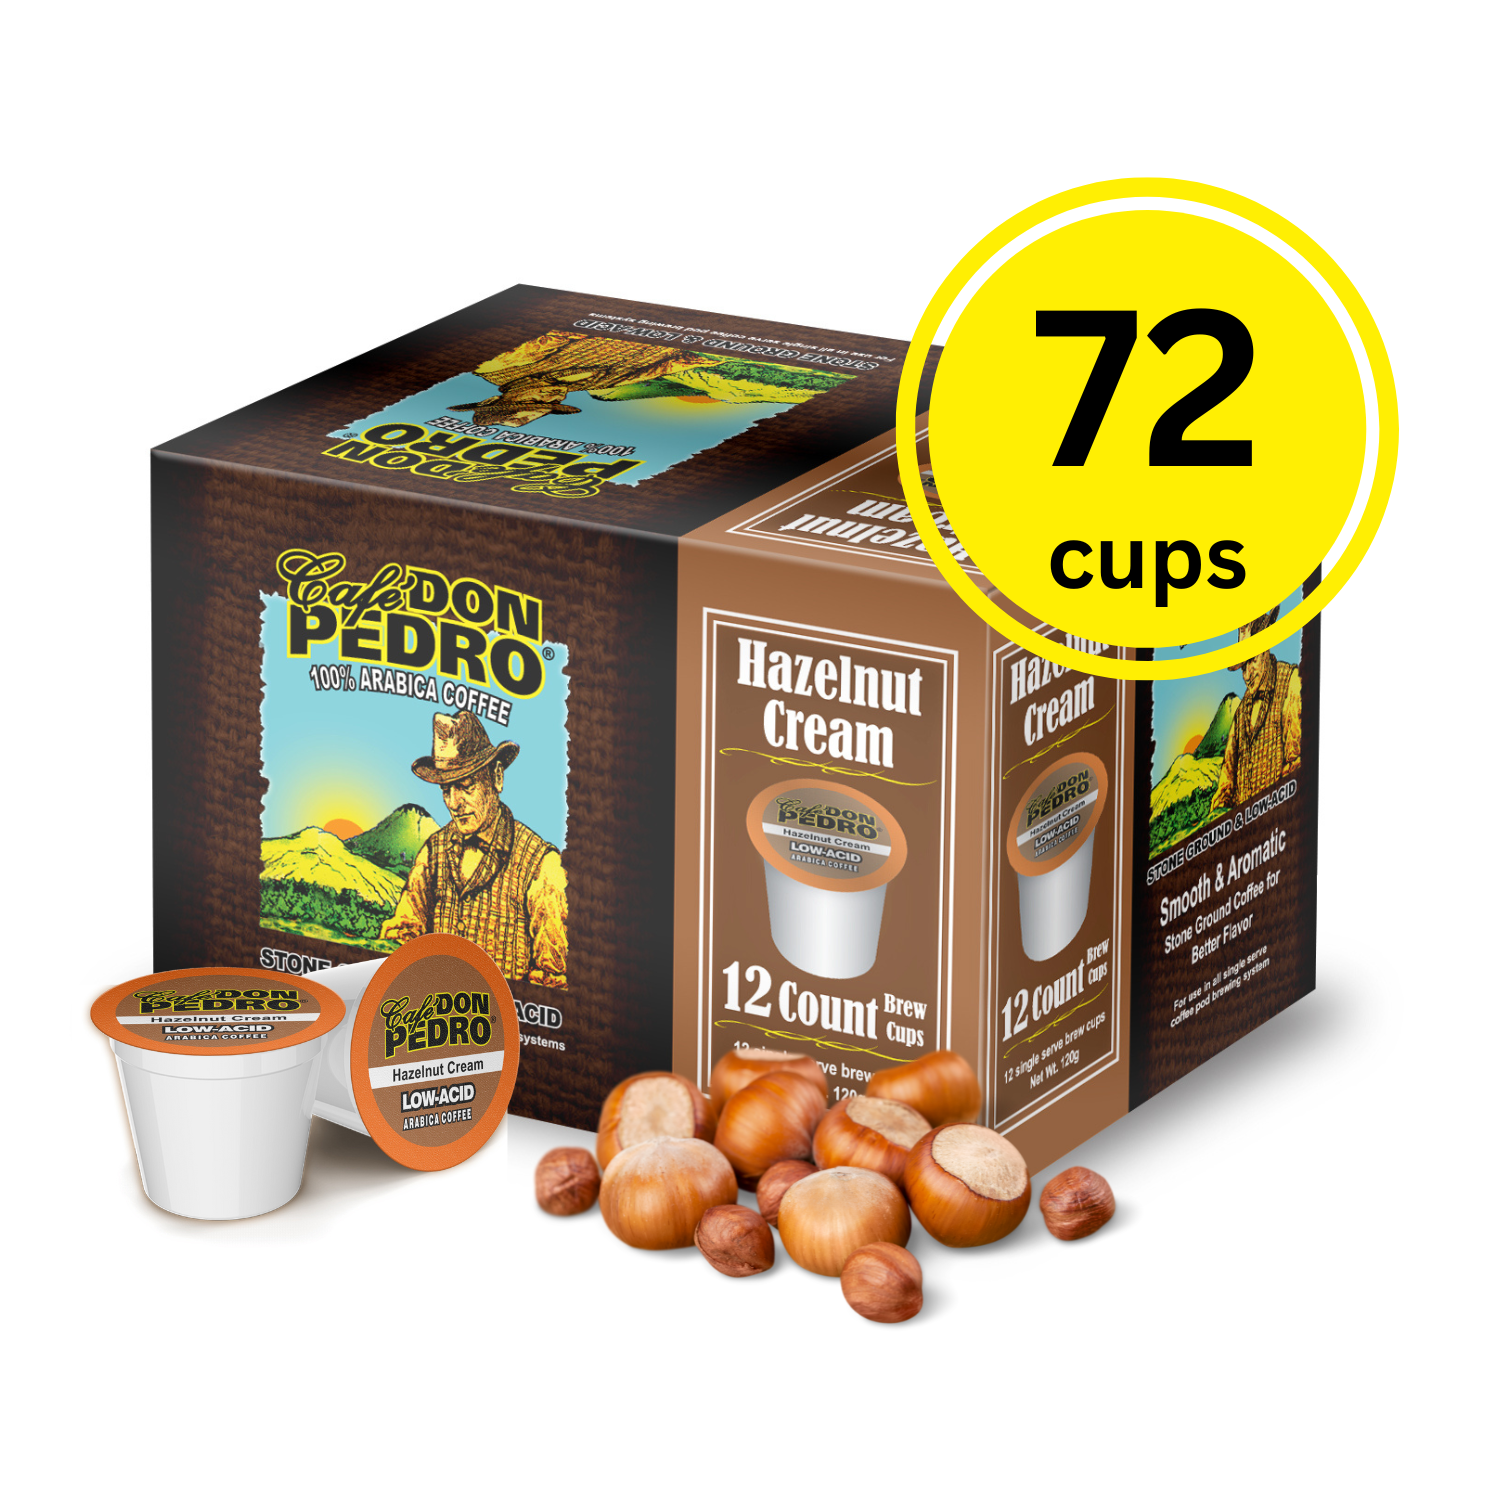 Cafe Don Pedro Hazelnut Cream Low-Acid Coffee Pods - 72 Ct. Compatible with Keurig K Cup Coffee Maker - 100% Arabica